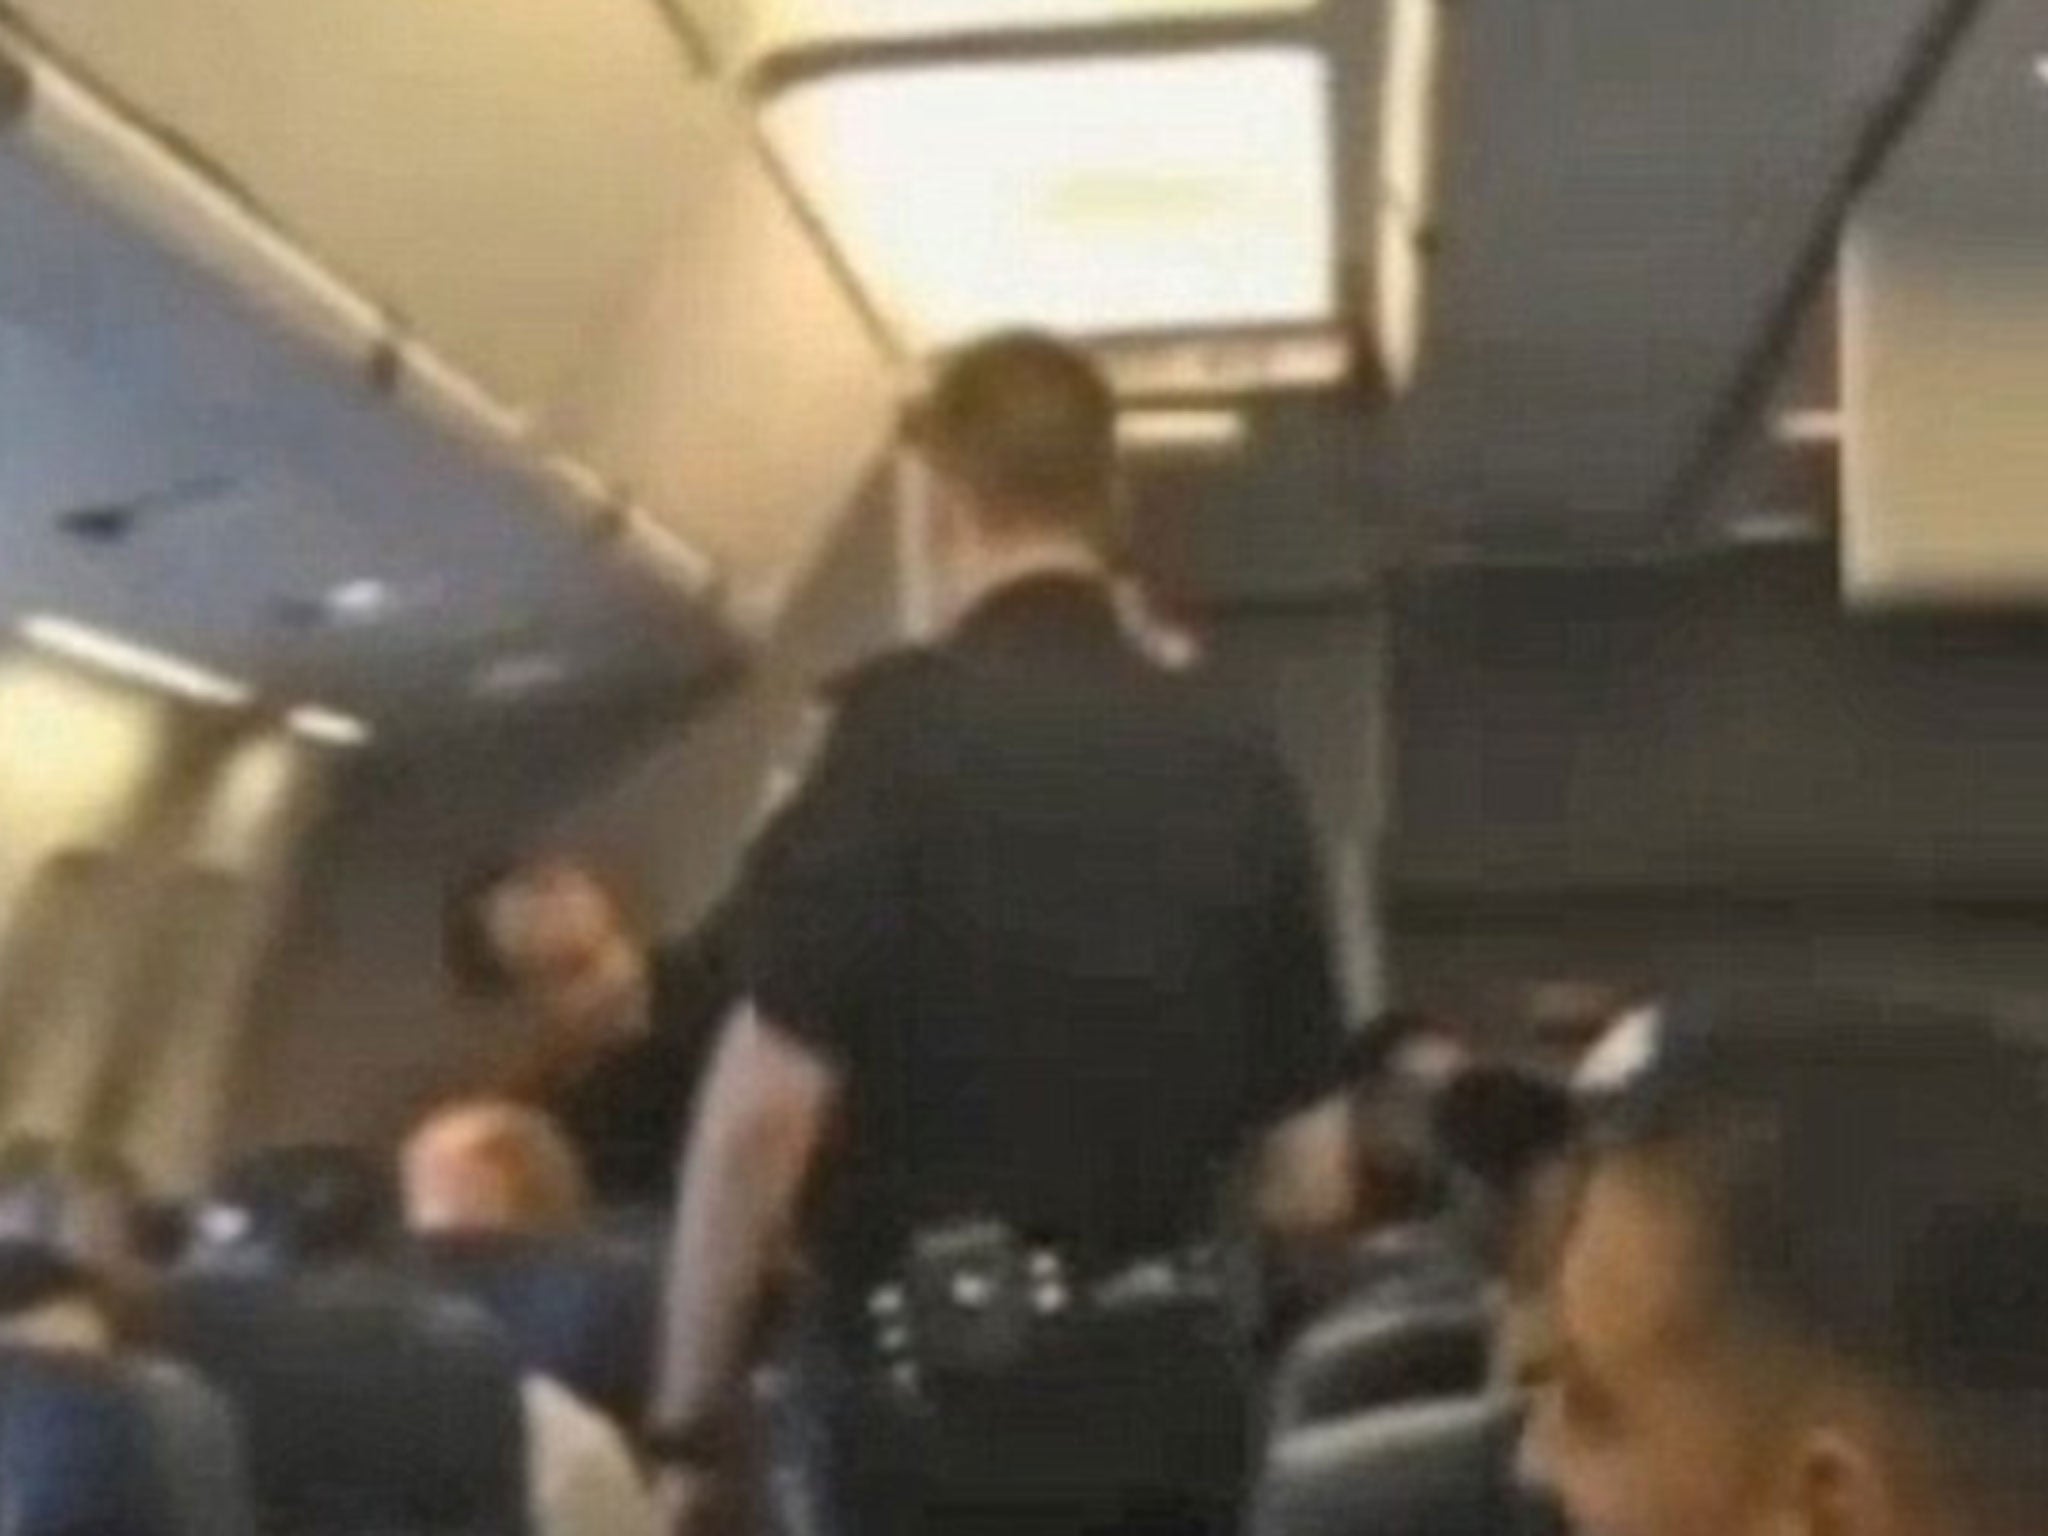 The unnamed woman was handcuffed and removed from the flight by air marshals after it was forced to divert to Kansas.